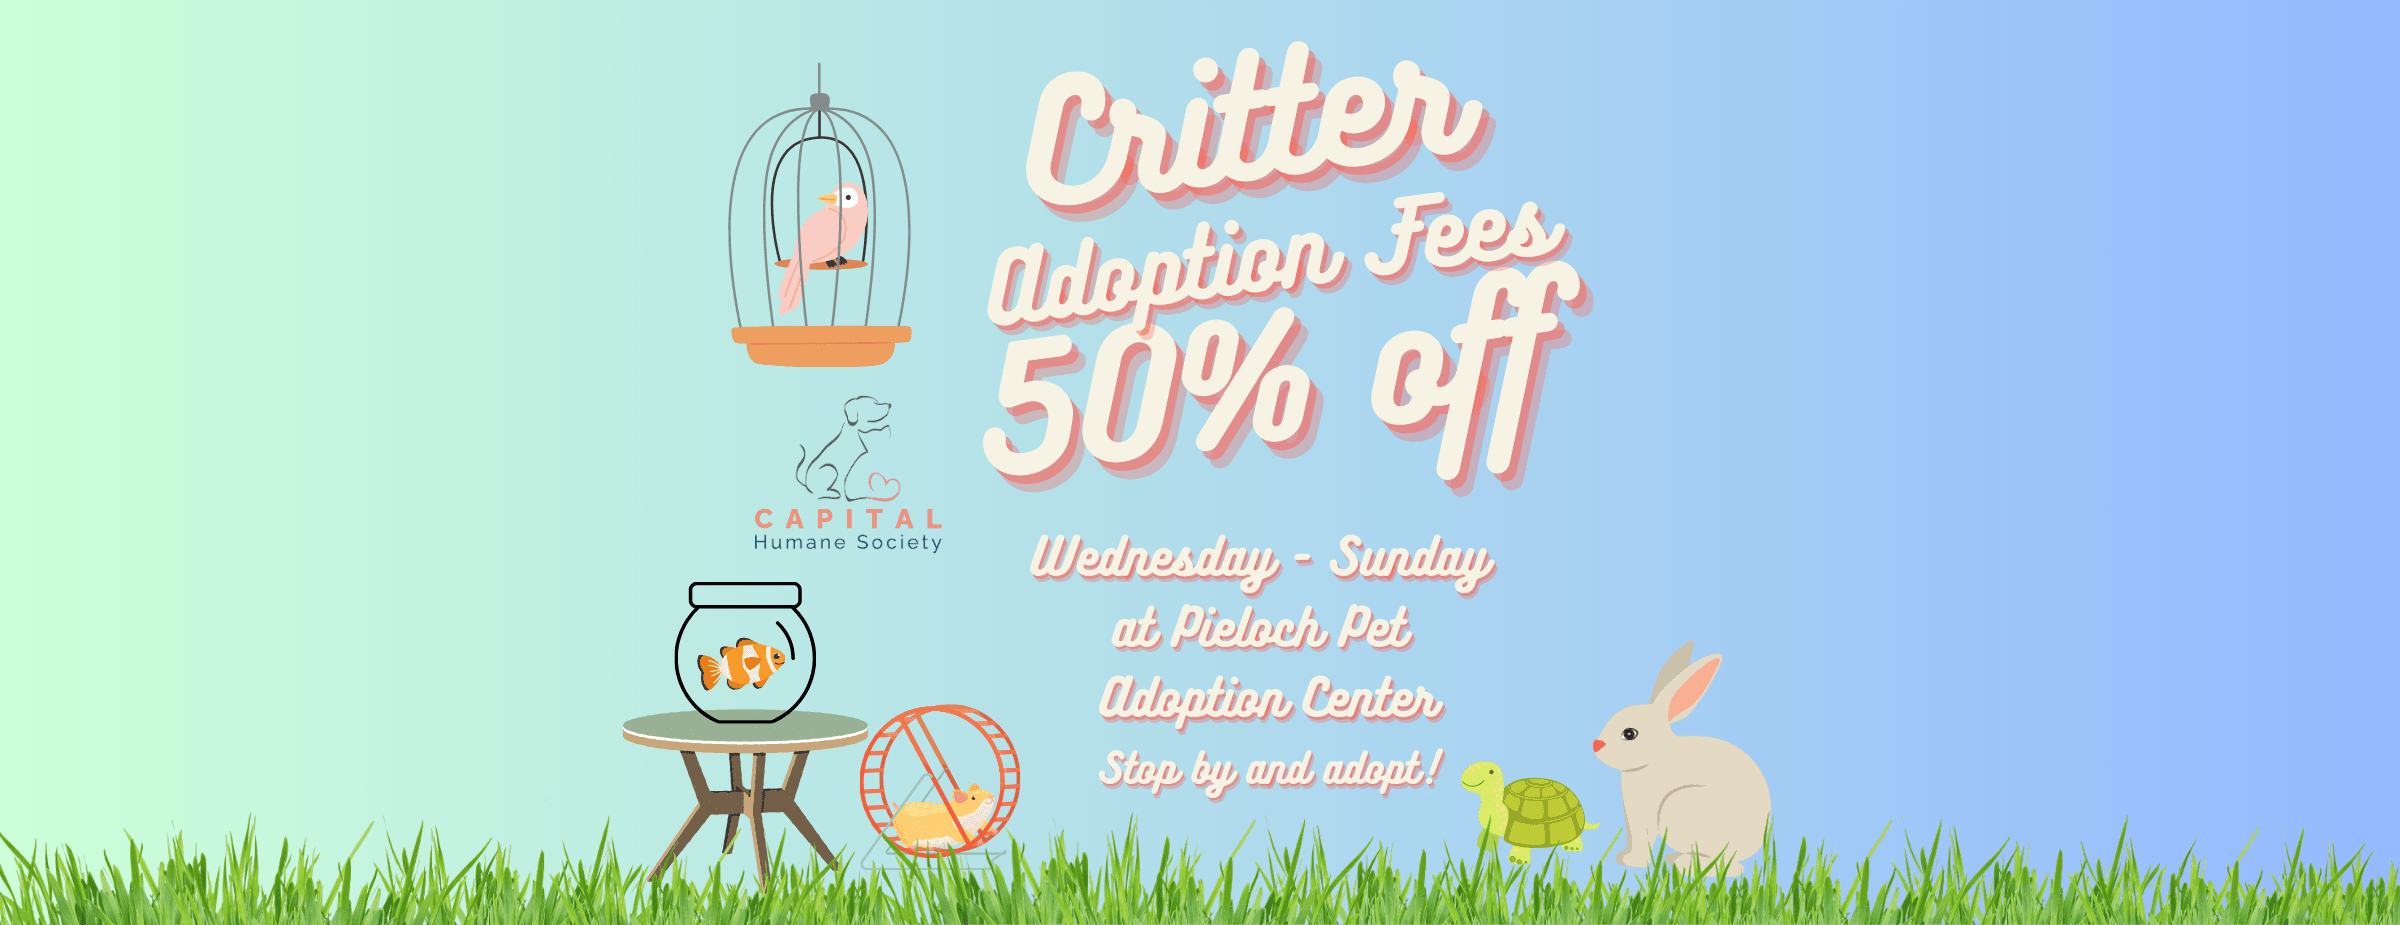 Critter Adoption Fees 50% off